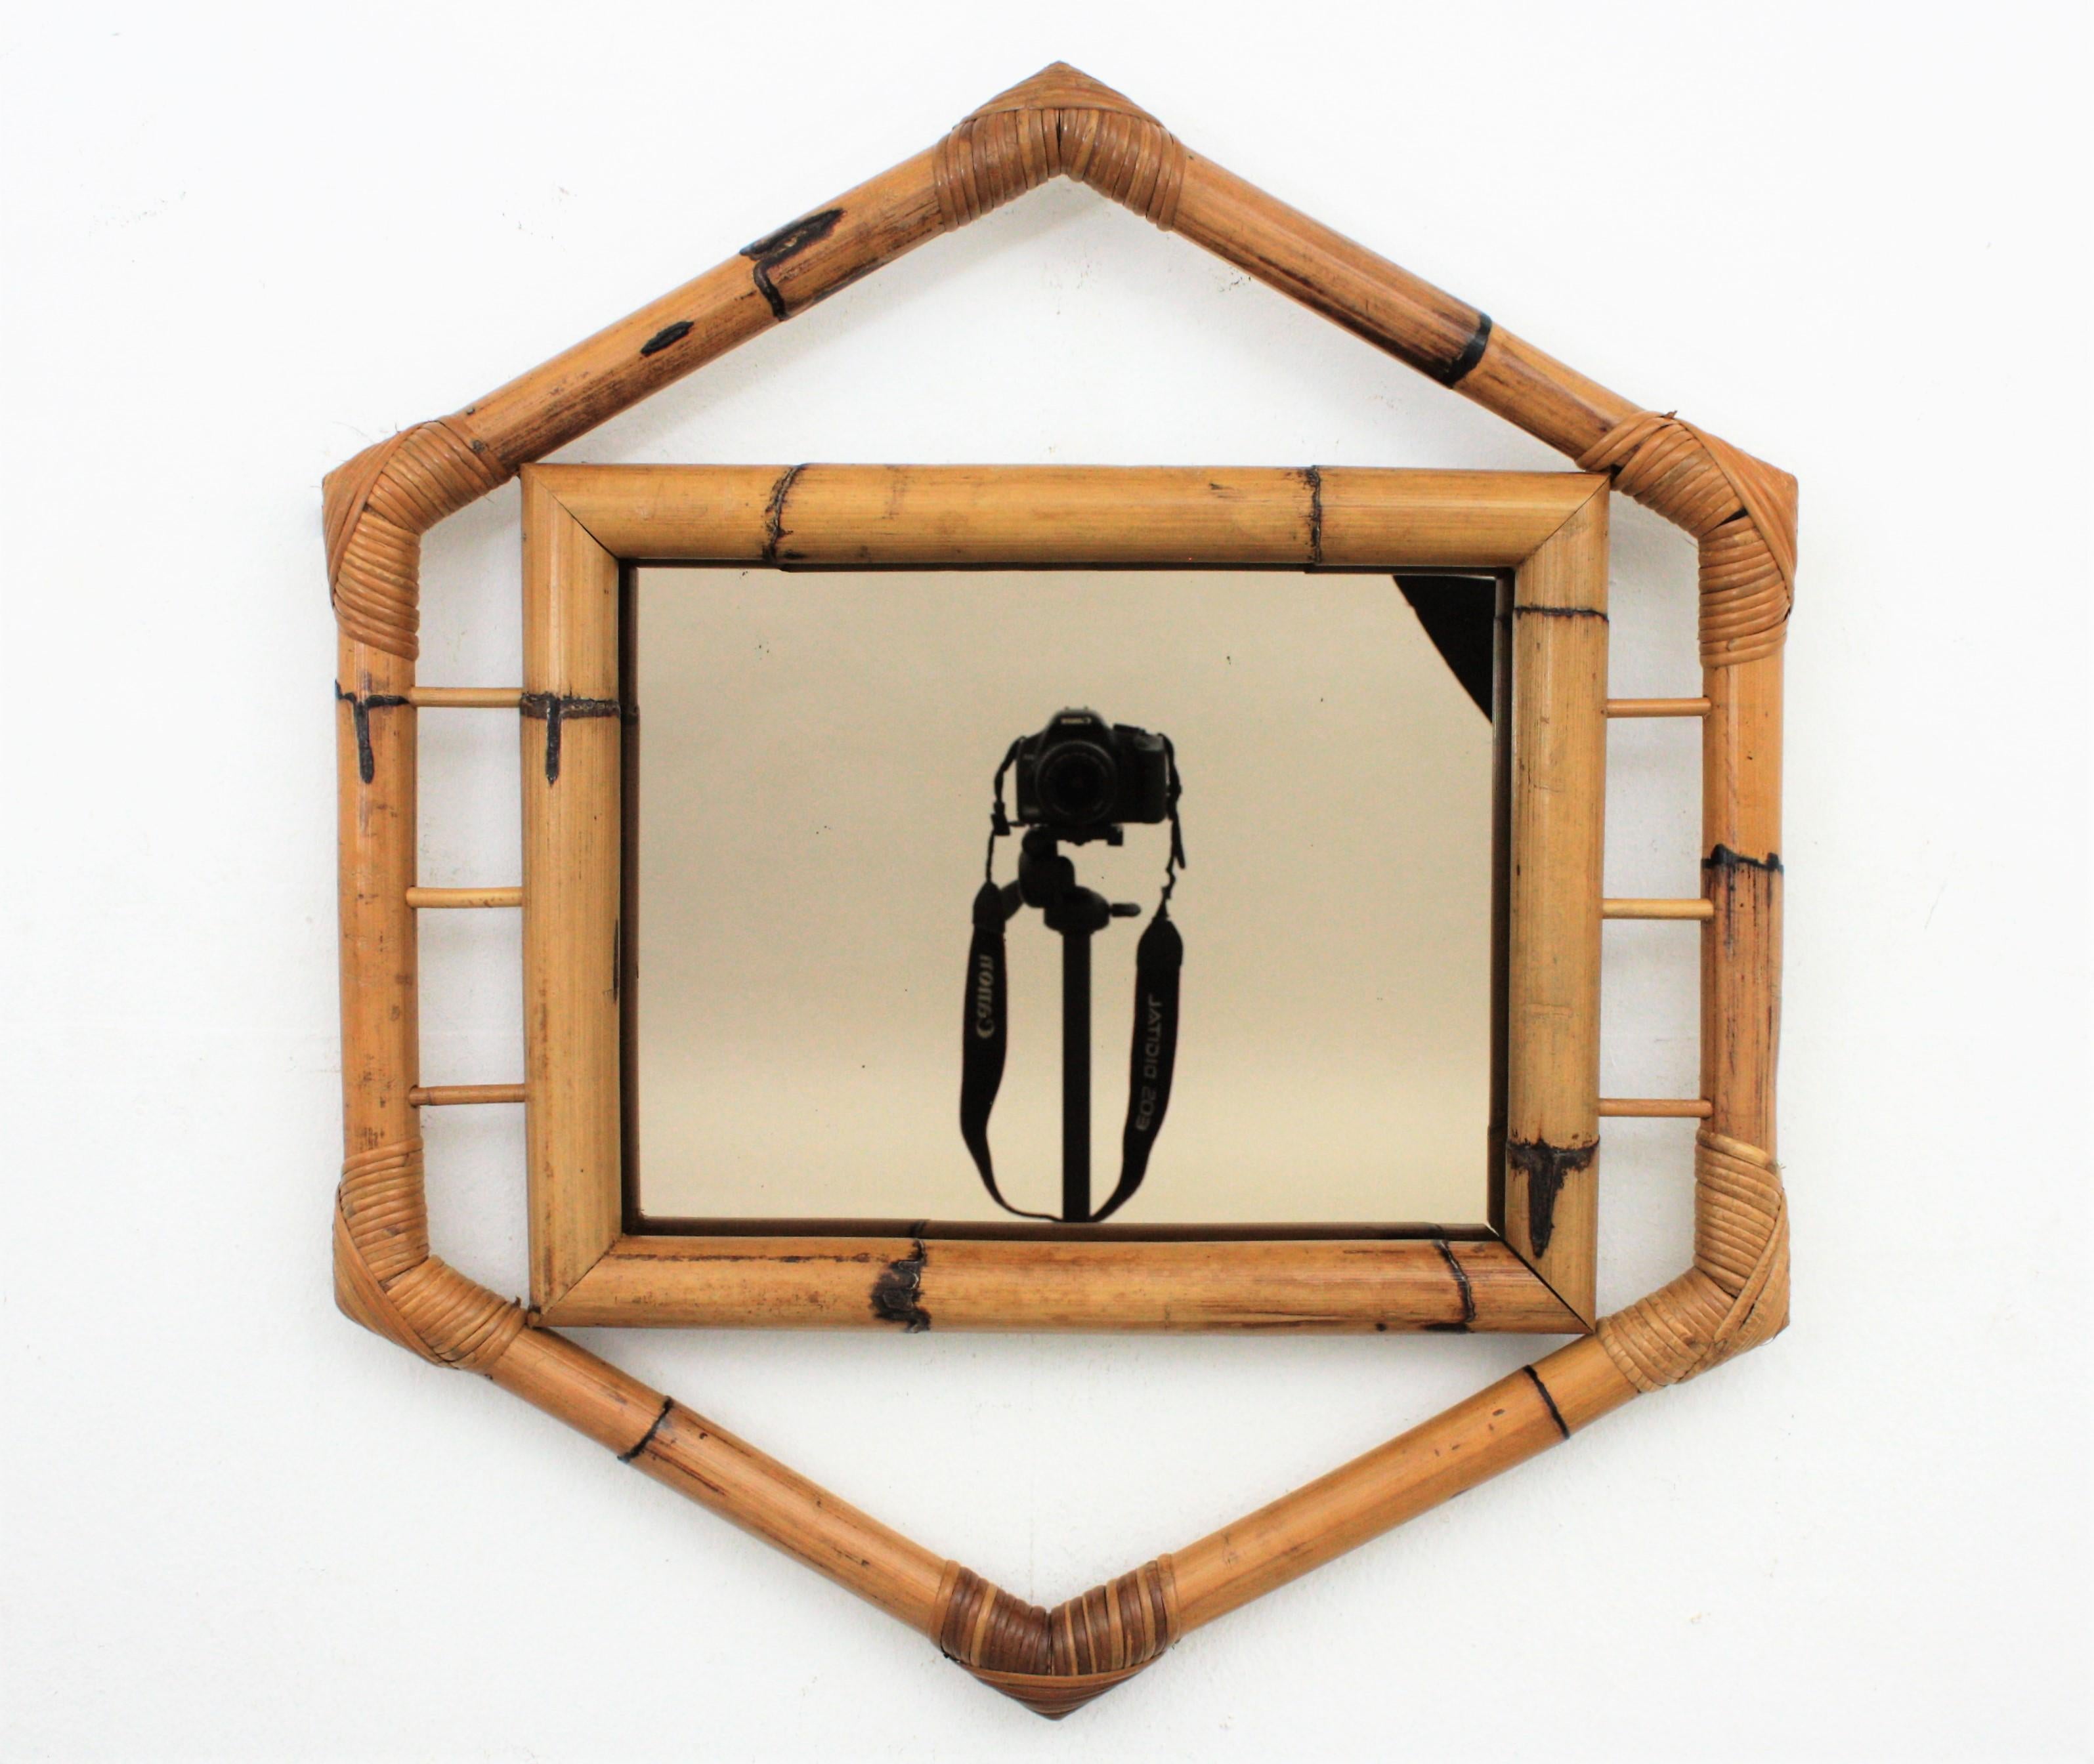 A beautiful hexagonal shaped bamboo mirror with colonial and Tiki oriental accents and smoked mirror, France, 1950-1960.
Handcrafted with thick bamboo canes, it has some rattan details and the corners have wicker cord accents to join the frame